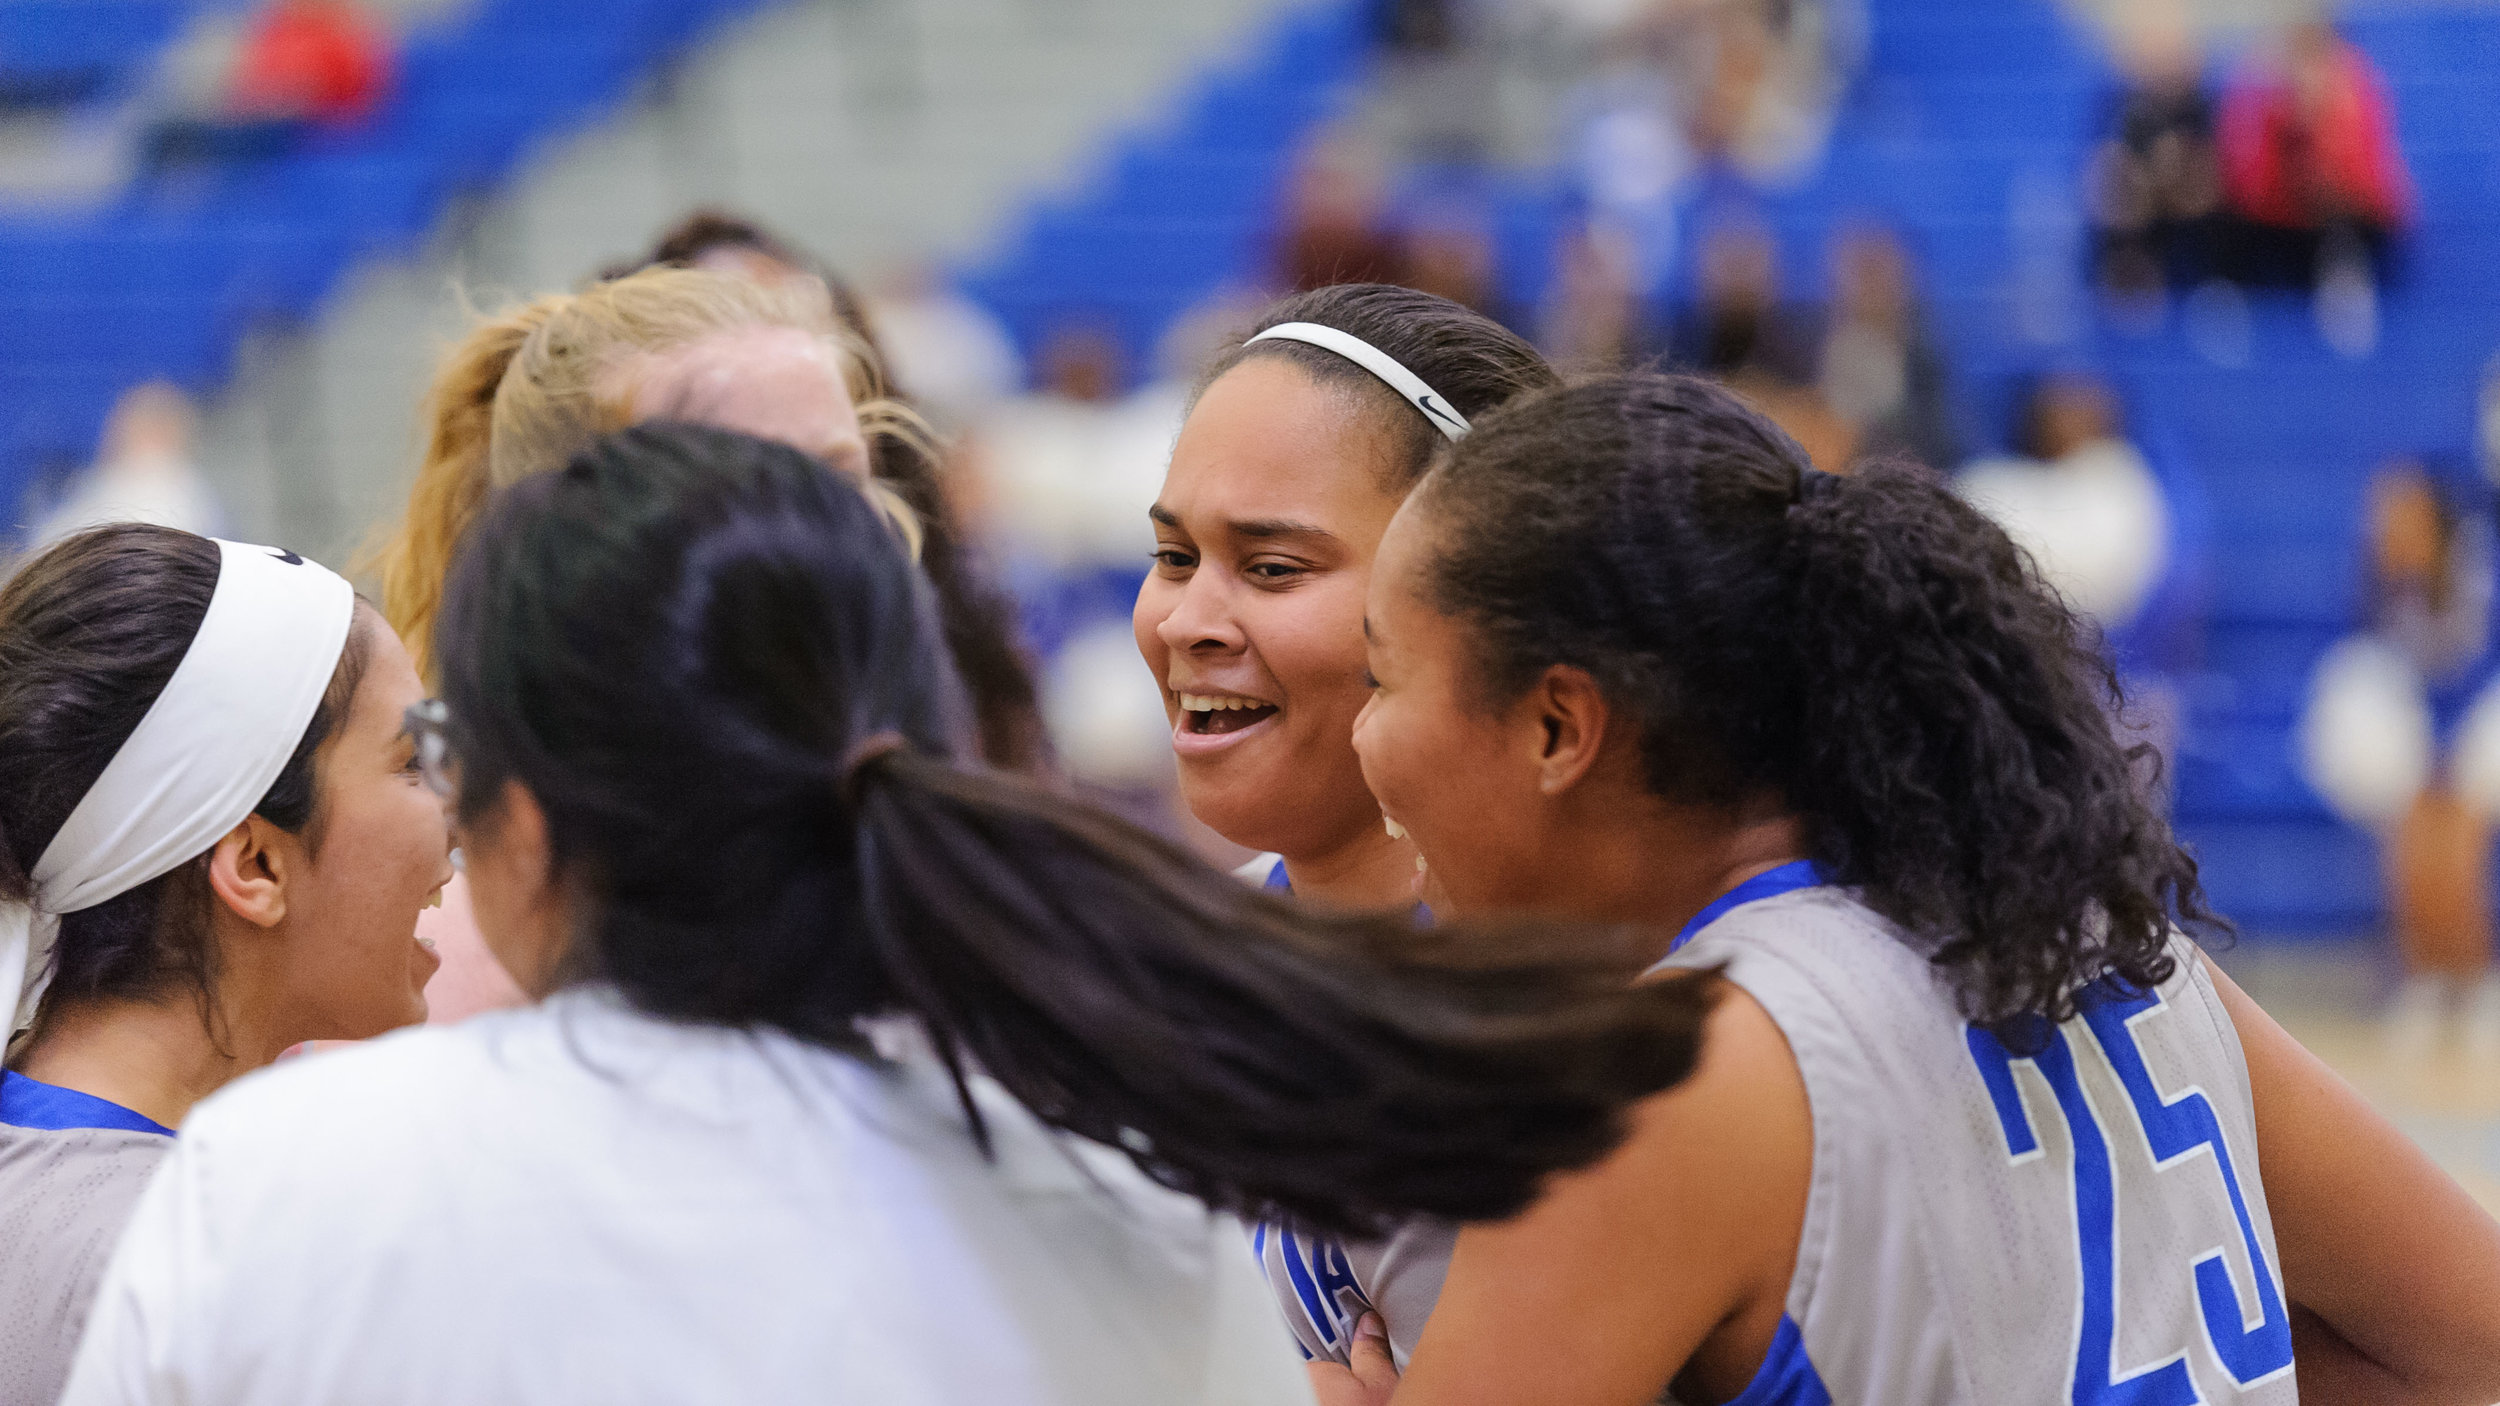  The Corsairs celebrate forward Rejinae Crandell's (0,Middle) three point make from half court at the end of the game. The Santa Monica College Corsairs win their final game of the season 76-53 against the Pierce College Brahmas. The game was held at